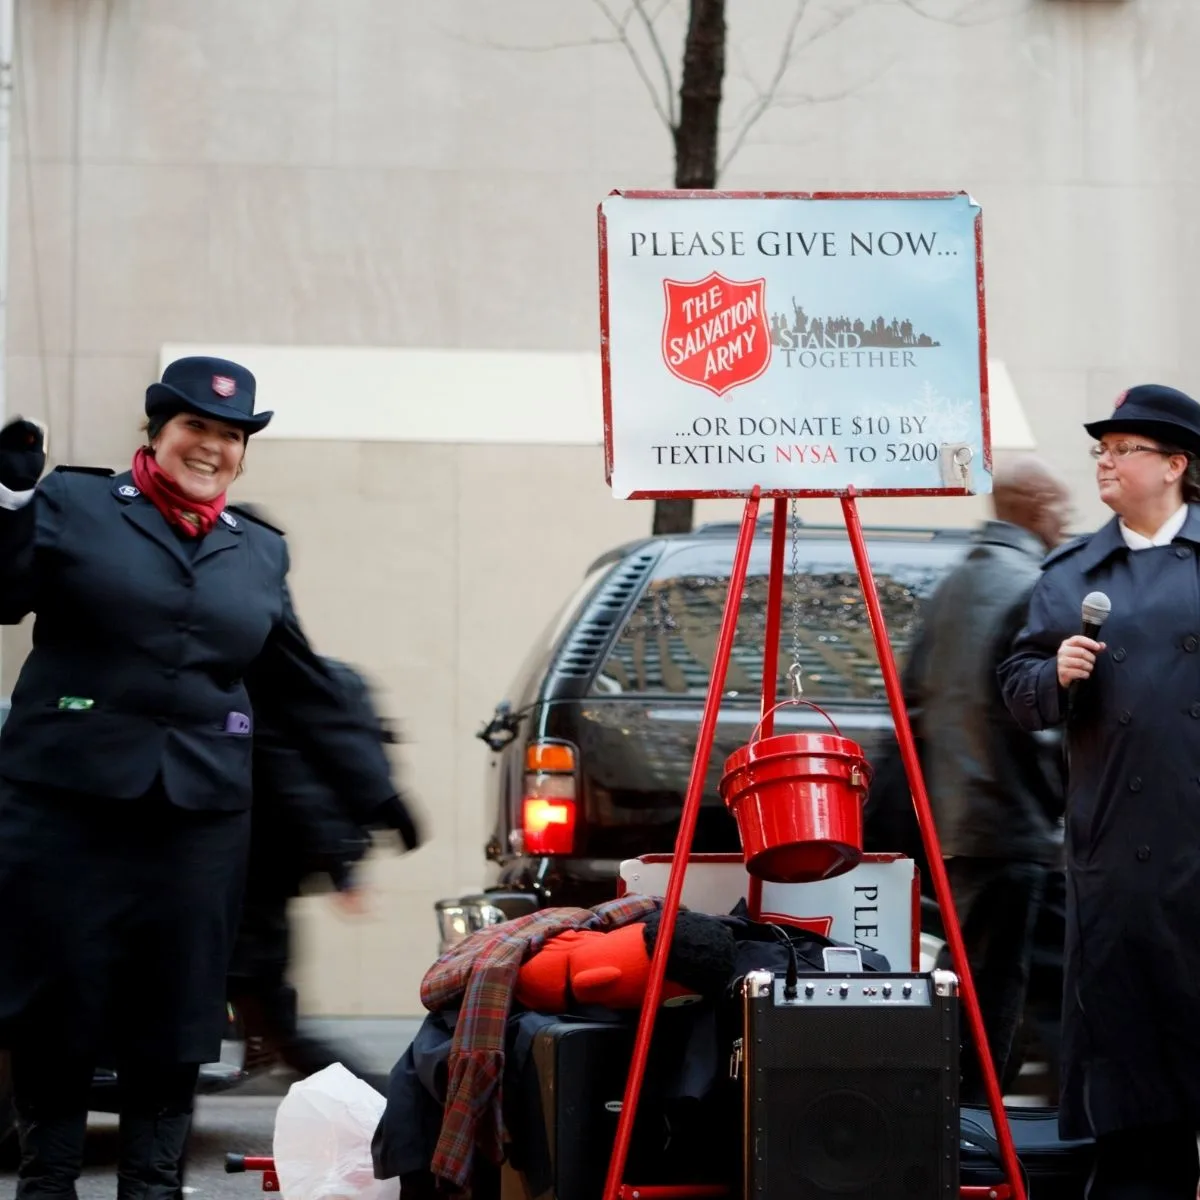 salvation army donation setup outside grocery store